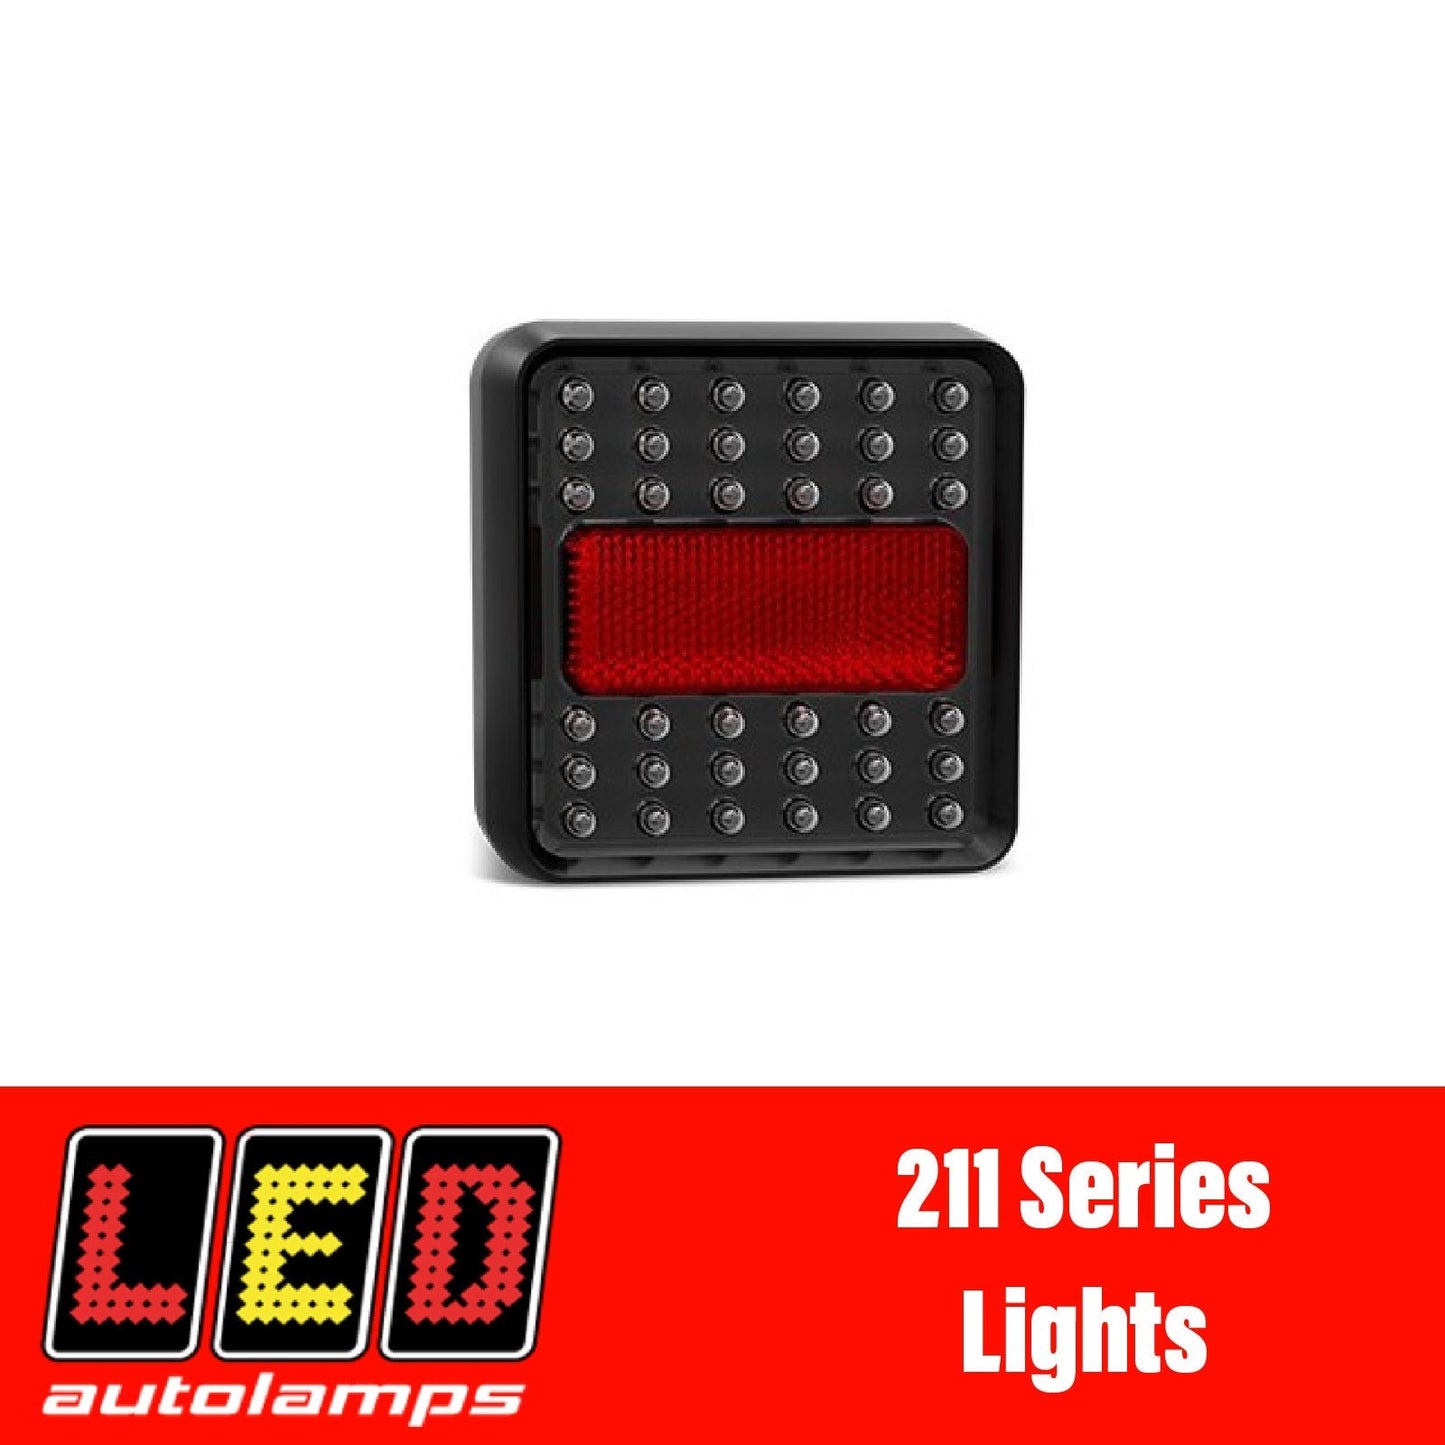 LED AUTOLAMPS 211 Series Boat Trailer LED Lights